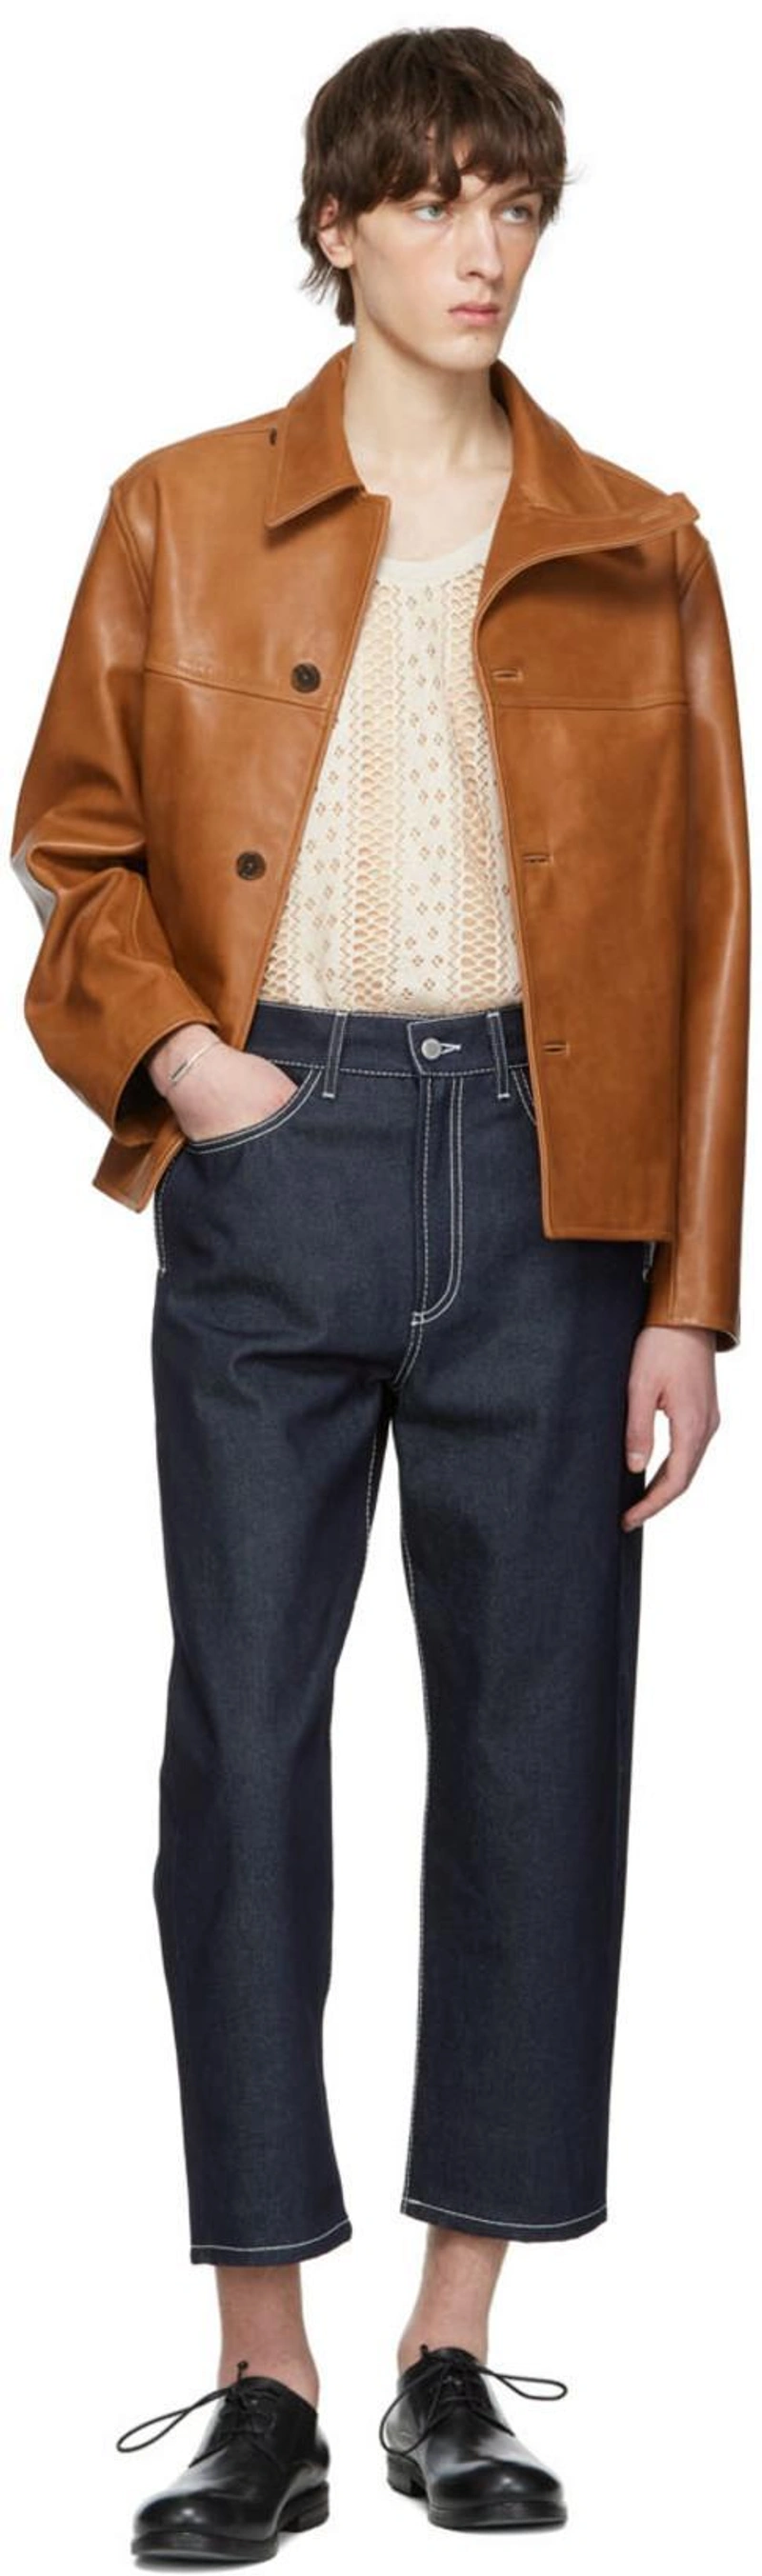 SSENSE's Post | Wearing: Sunnei Contrast-stitched Straight-leg Jeans In Denim; Commission Ssense Exclusive Brown Leather Jacket In Cognac; Cmmn Swdn Off-white Tank Tank Top